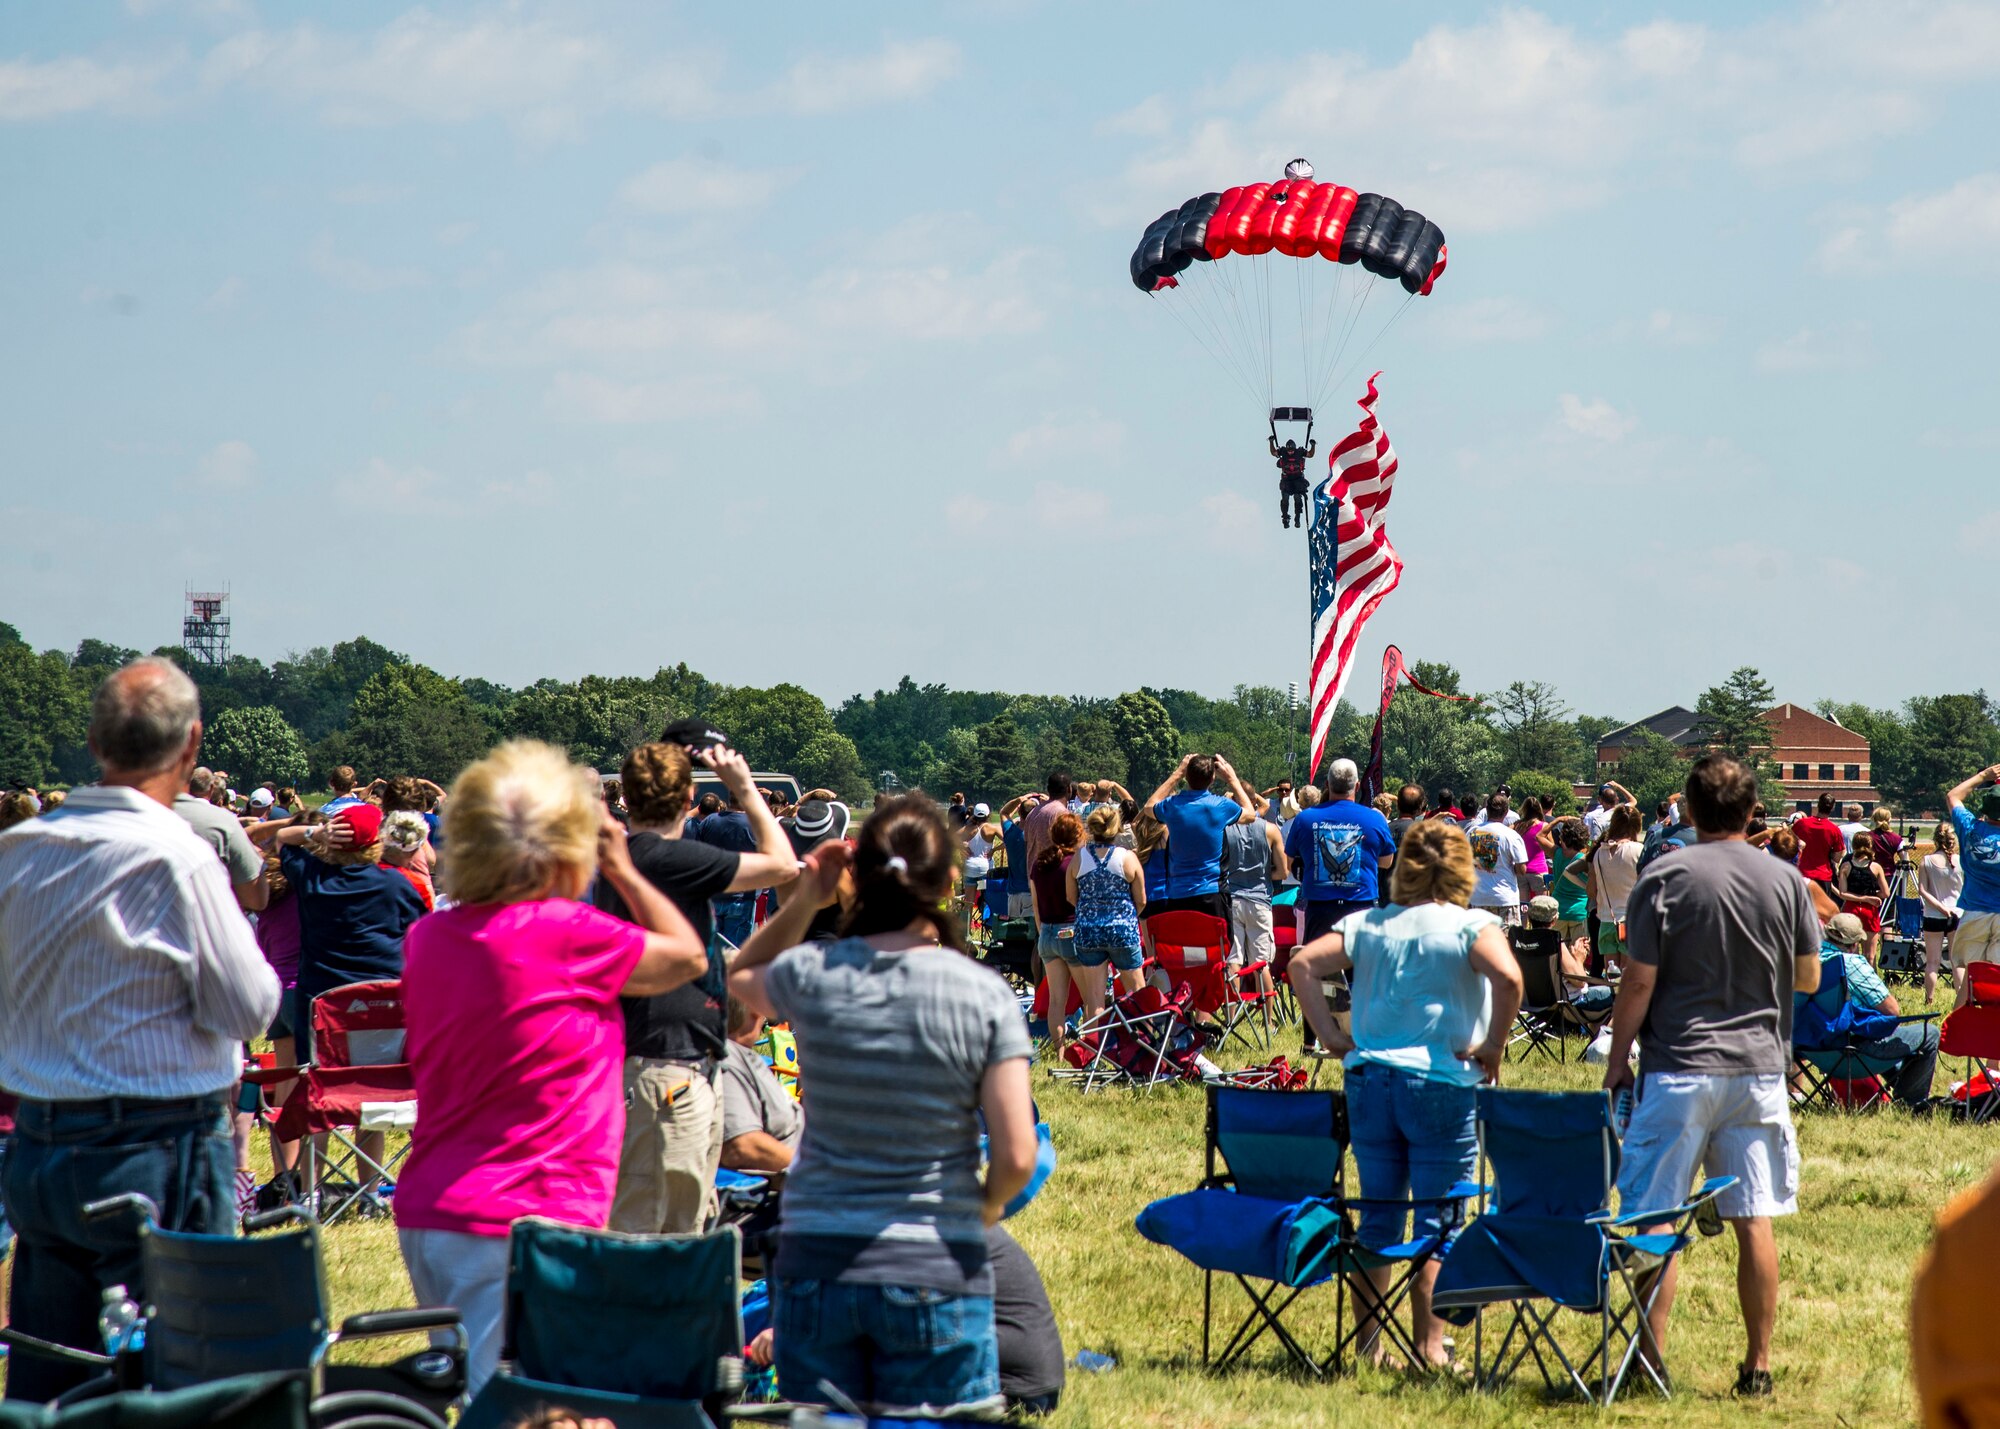 Members of the Black Daggers, the official U.S. Army Special Operations Command Parachute Demonstration Team, perform aerial stunts during Scott Air Force Base 2017 Air Show and Open House June 11, which celebrates the base’s 100th anniversary.  Black Daggers are highly trained Soldiers who insert themselves behind enemy lines to disrupt the movement of enemy troops and supplies to the front lines.  They frequently use parachutes to infiltrate without being detected. (Air Force photo by Airman 1st Class Daniel Garcia)